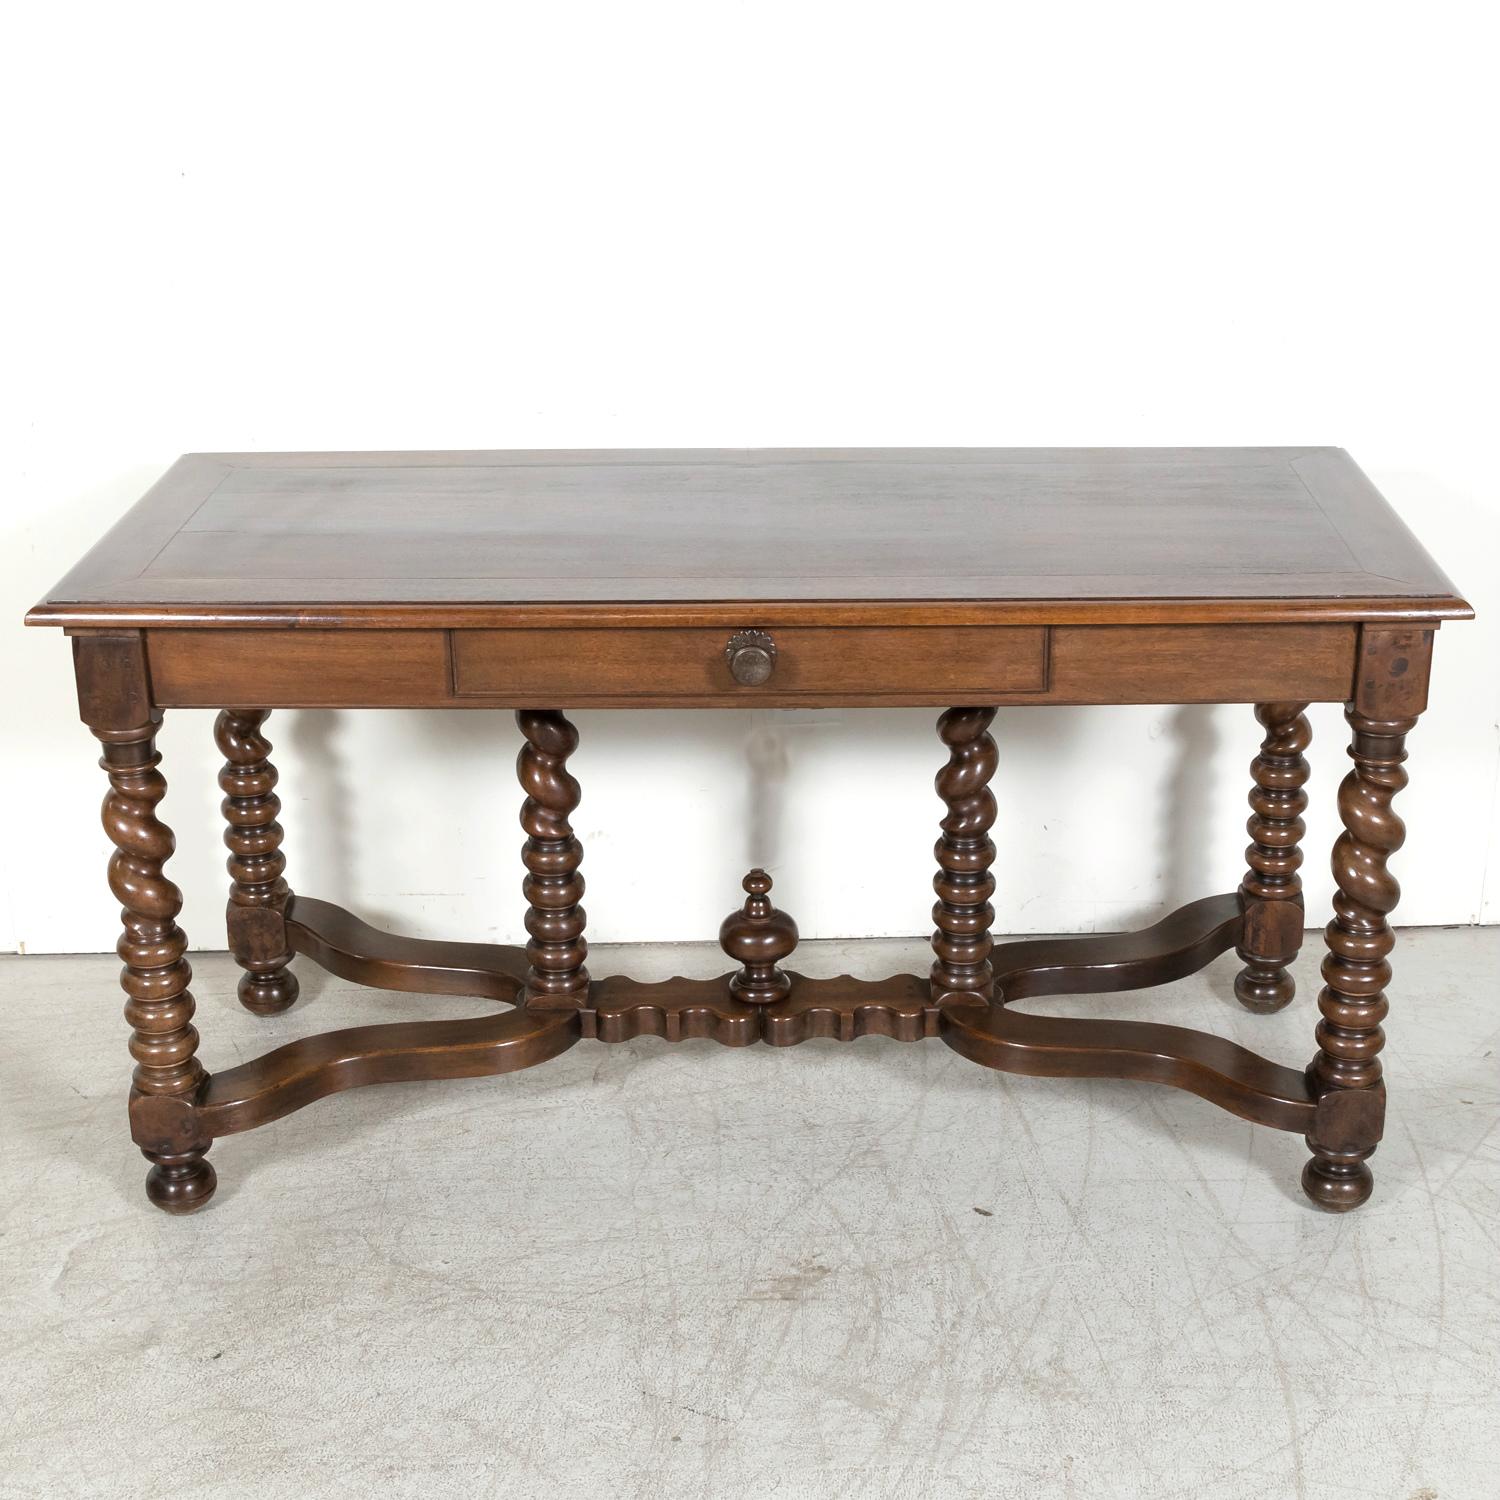 19th Century French Louis XIII Style Walnut Barley Twist Console Table In Good Condition For Sale In Birmingham, AL